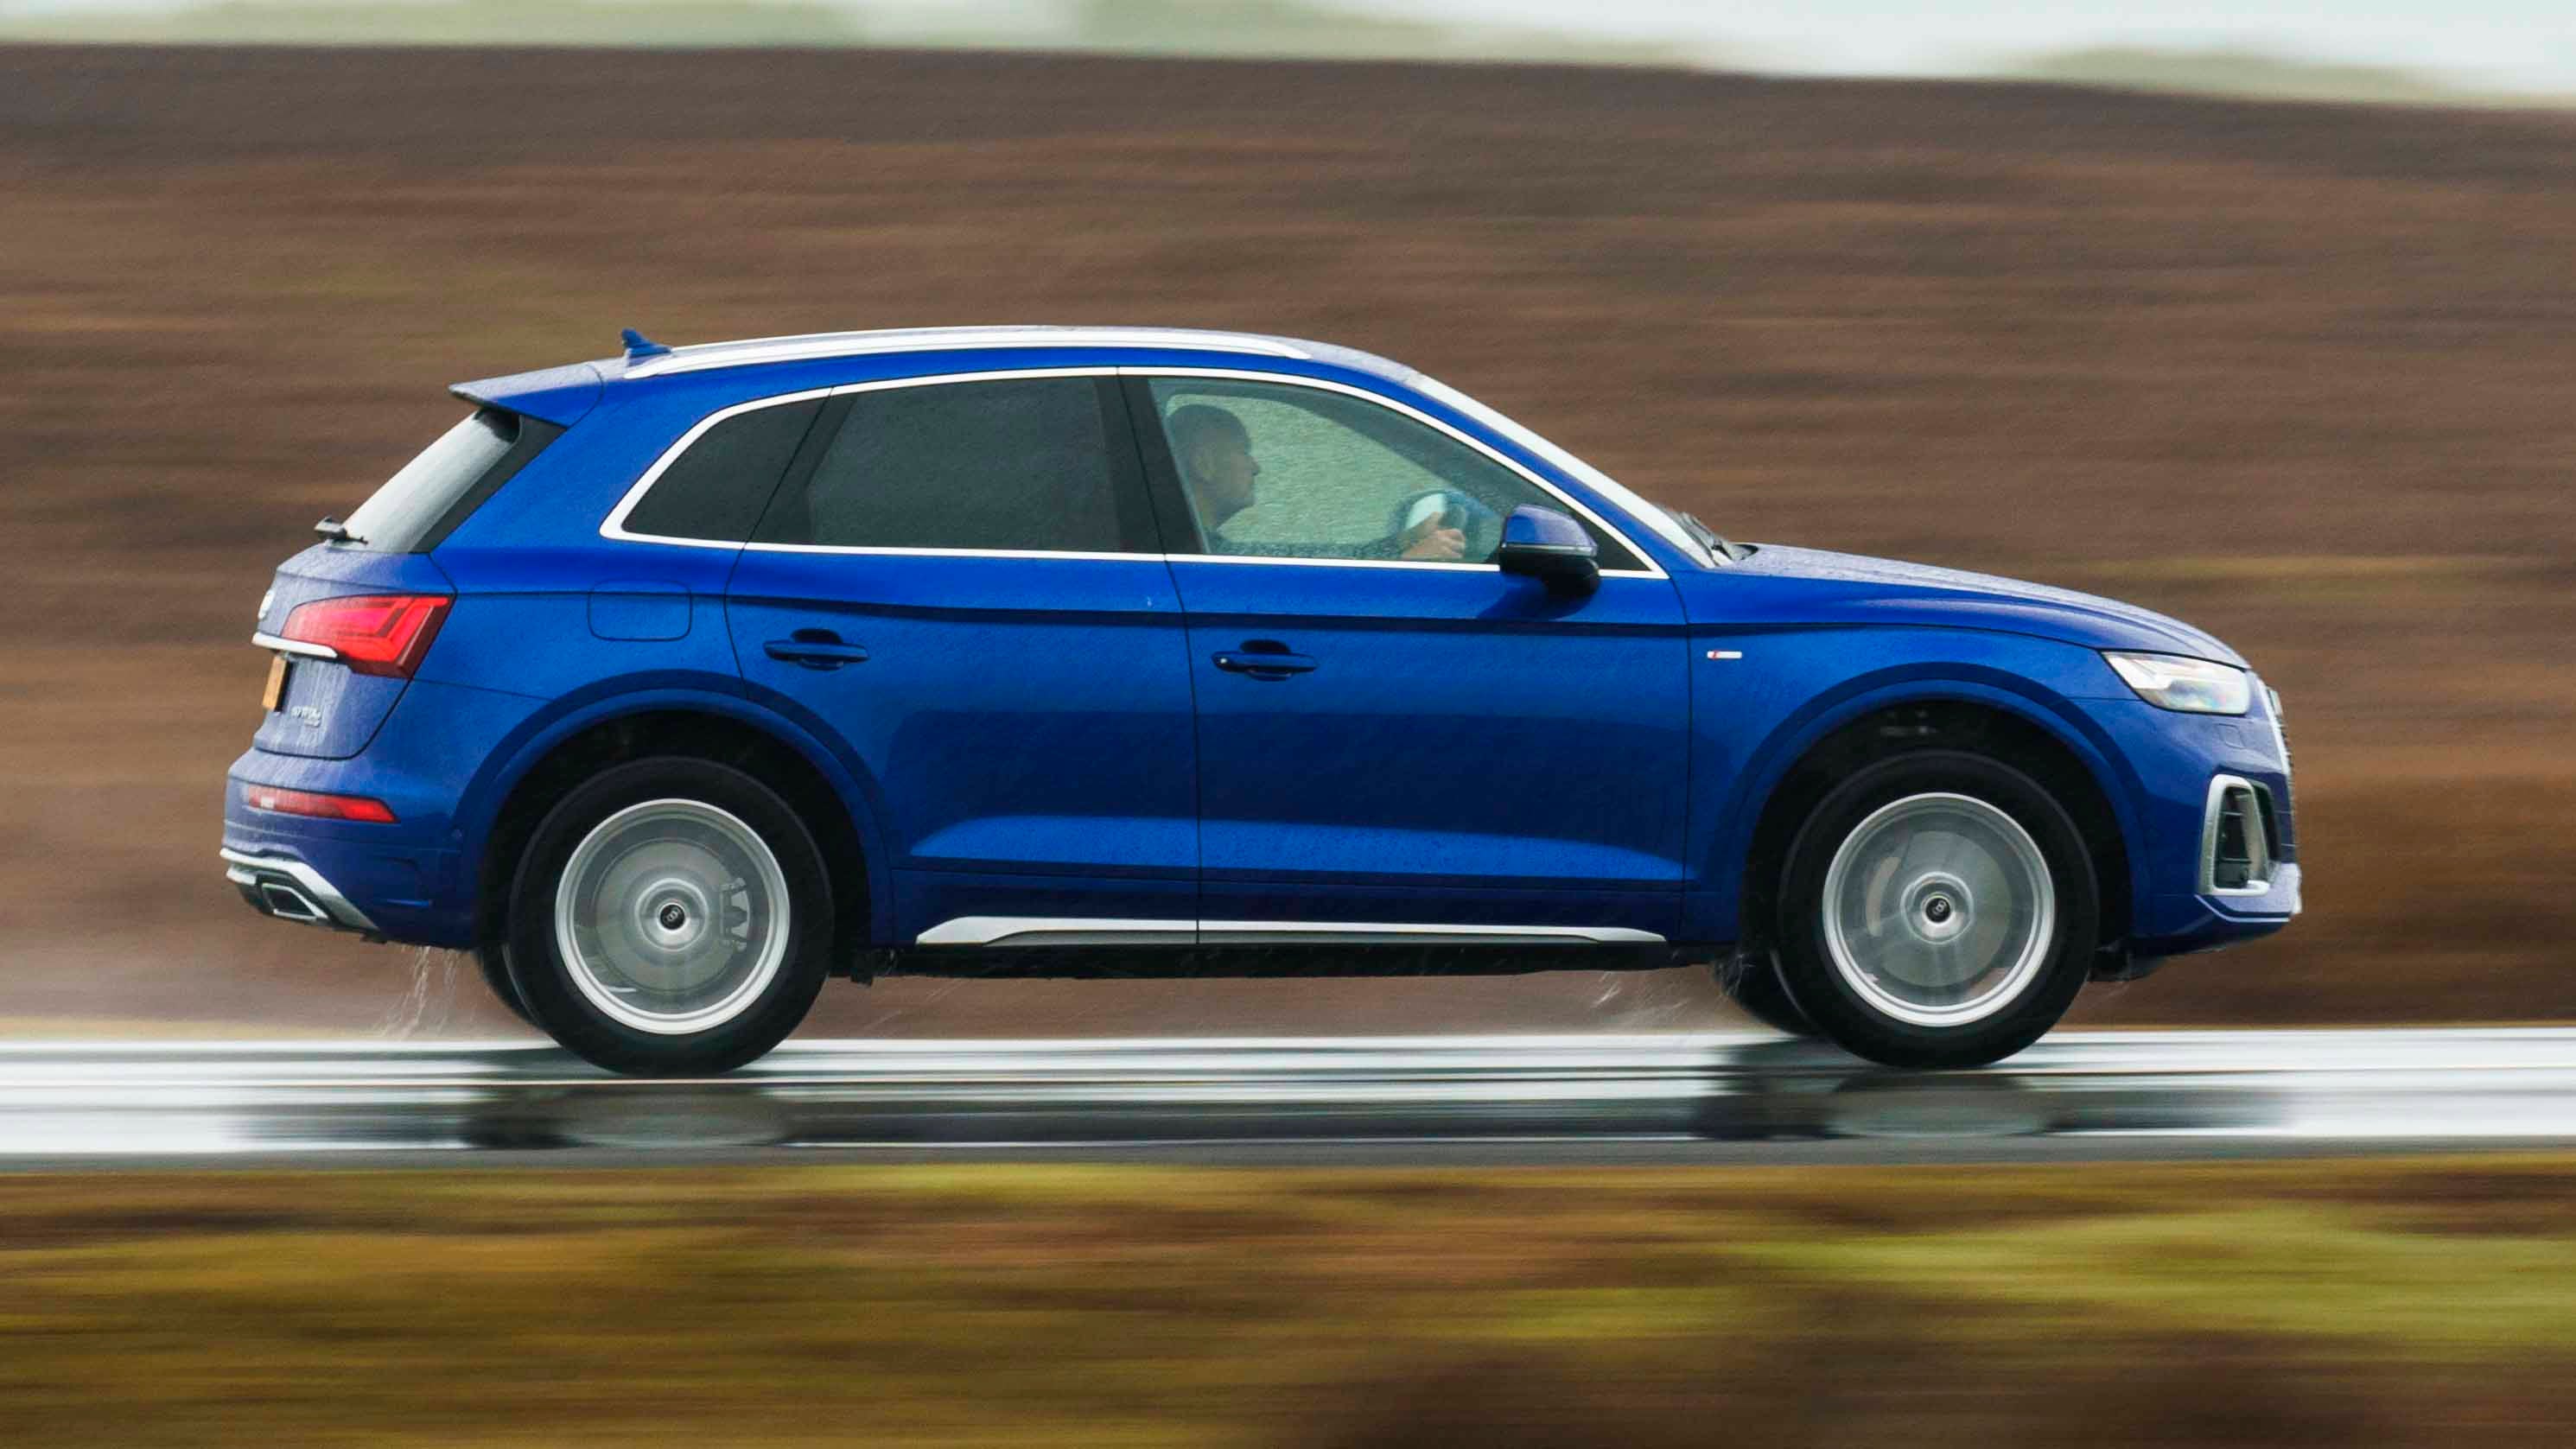 Audi Q5 driving side view